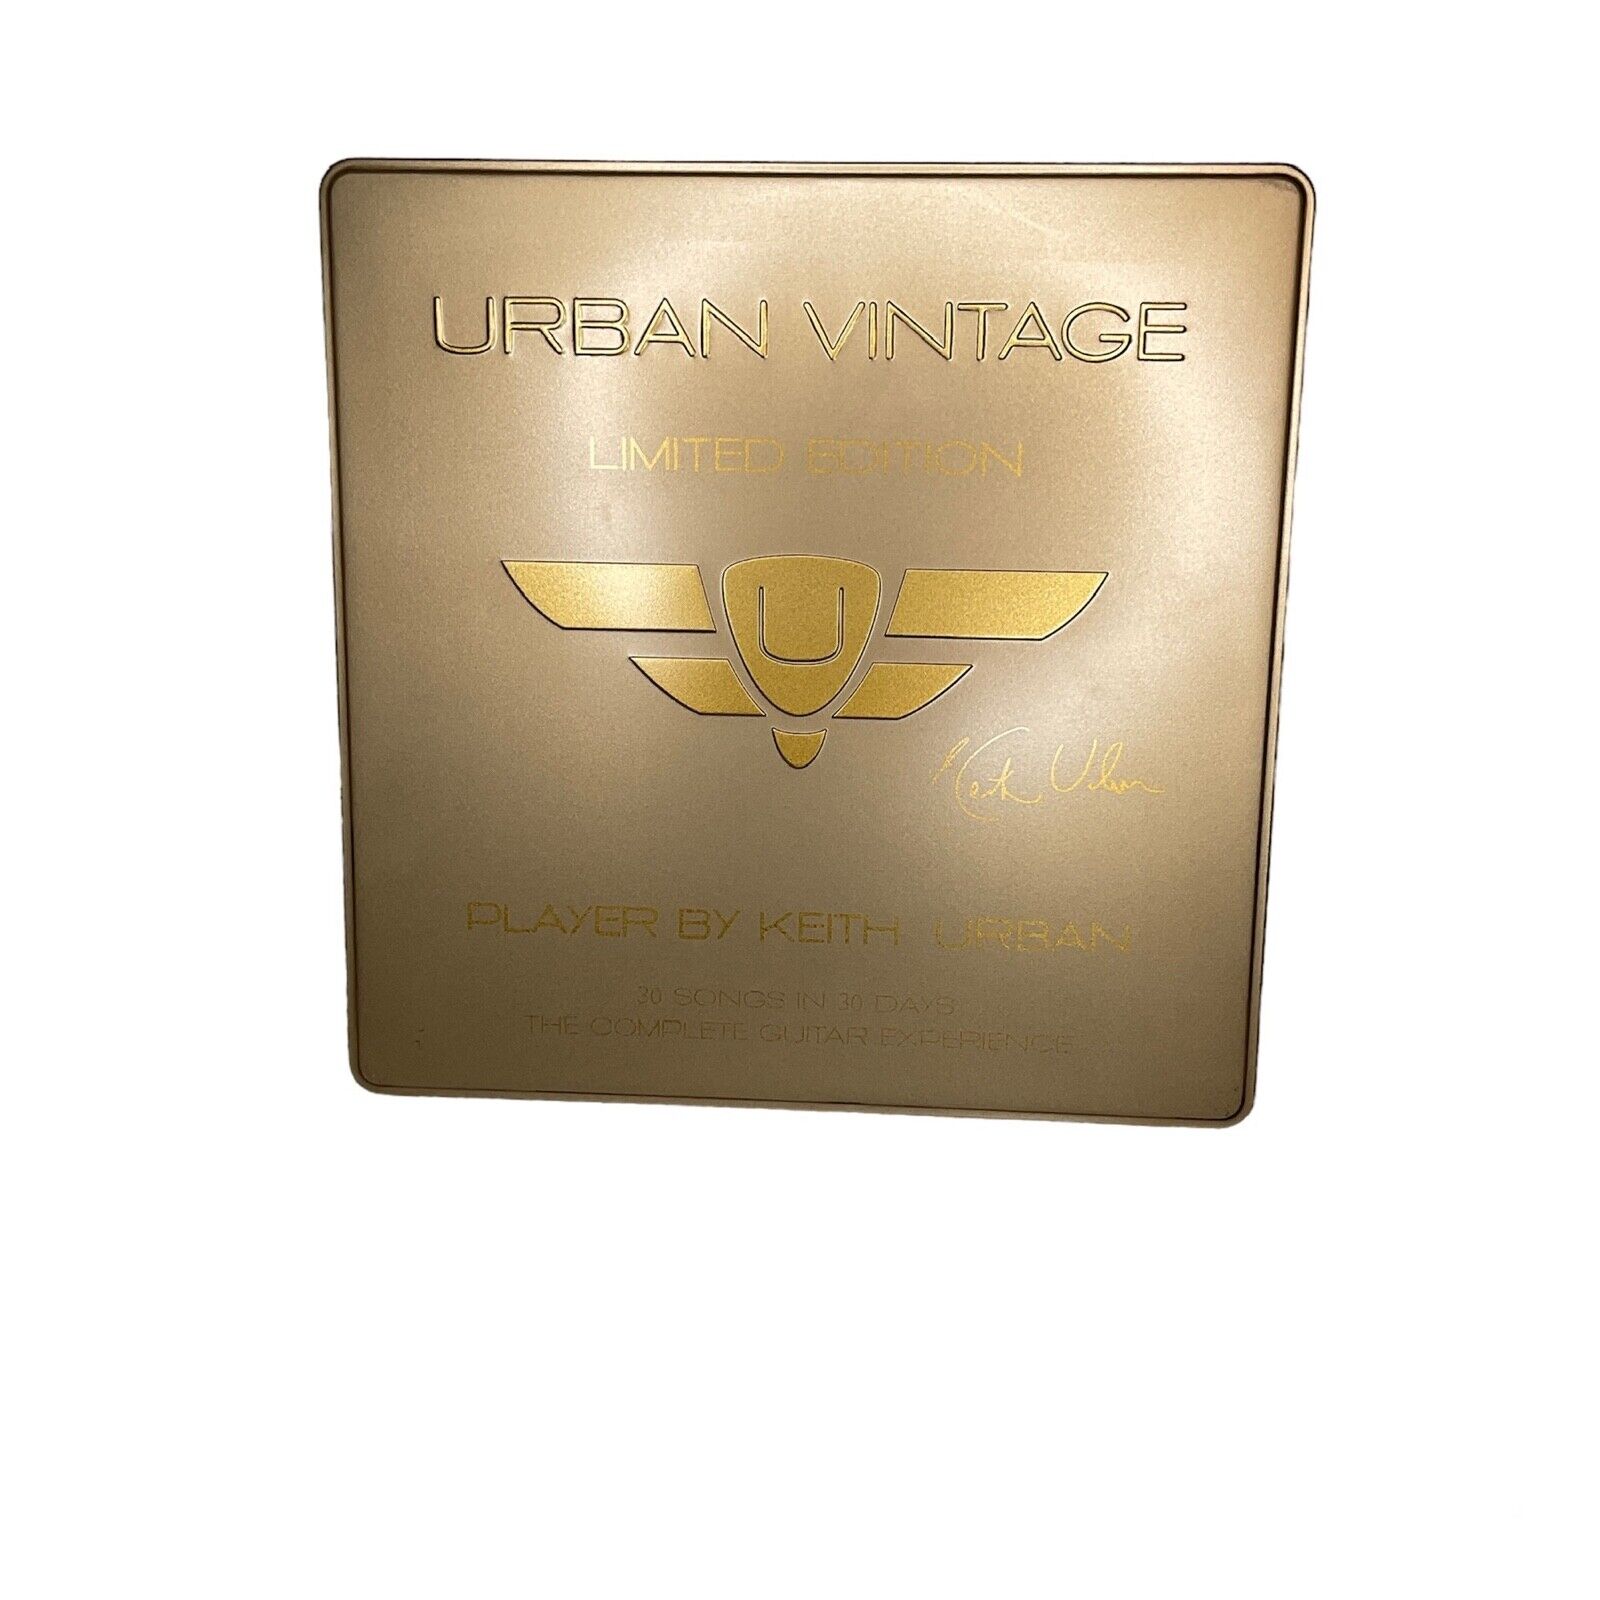 Keith Urban Urban Vintage Limited Edition 30 Songs in 30 Days CD in Gold Tin